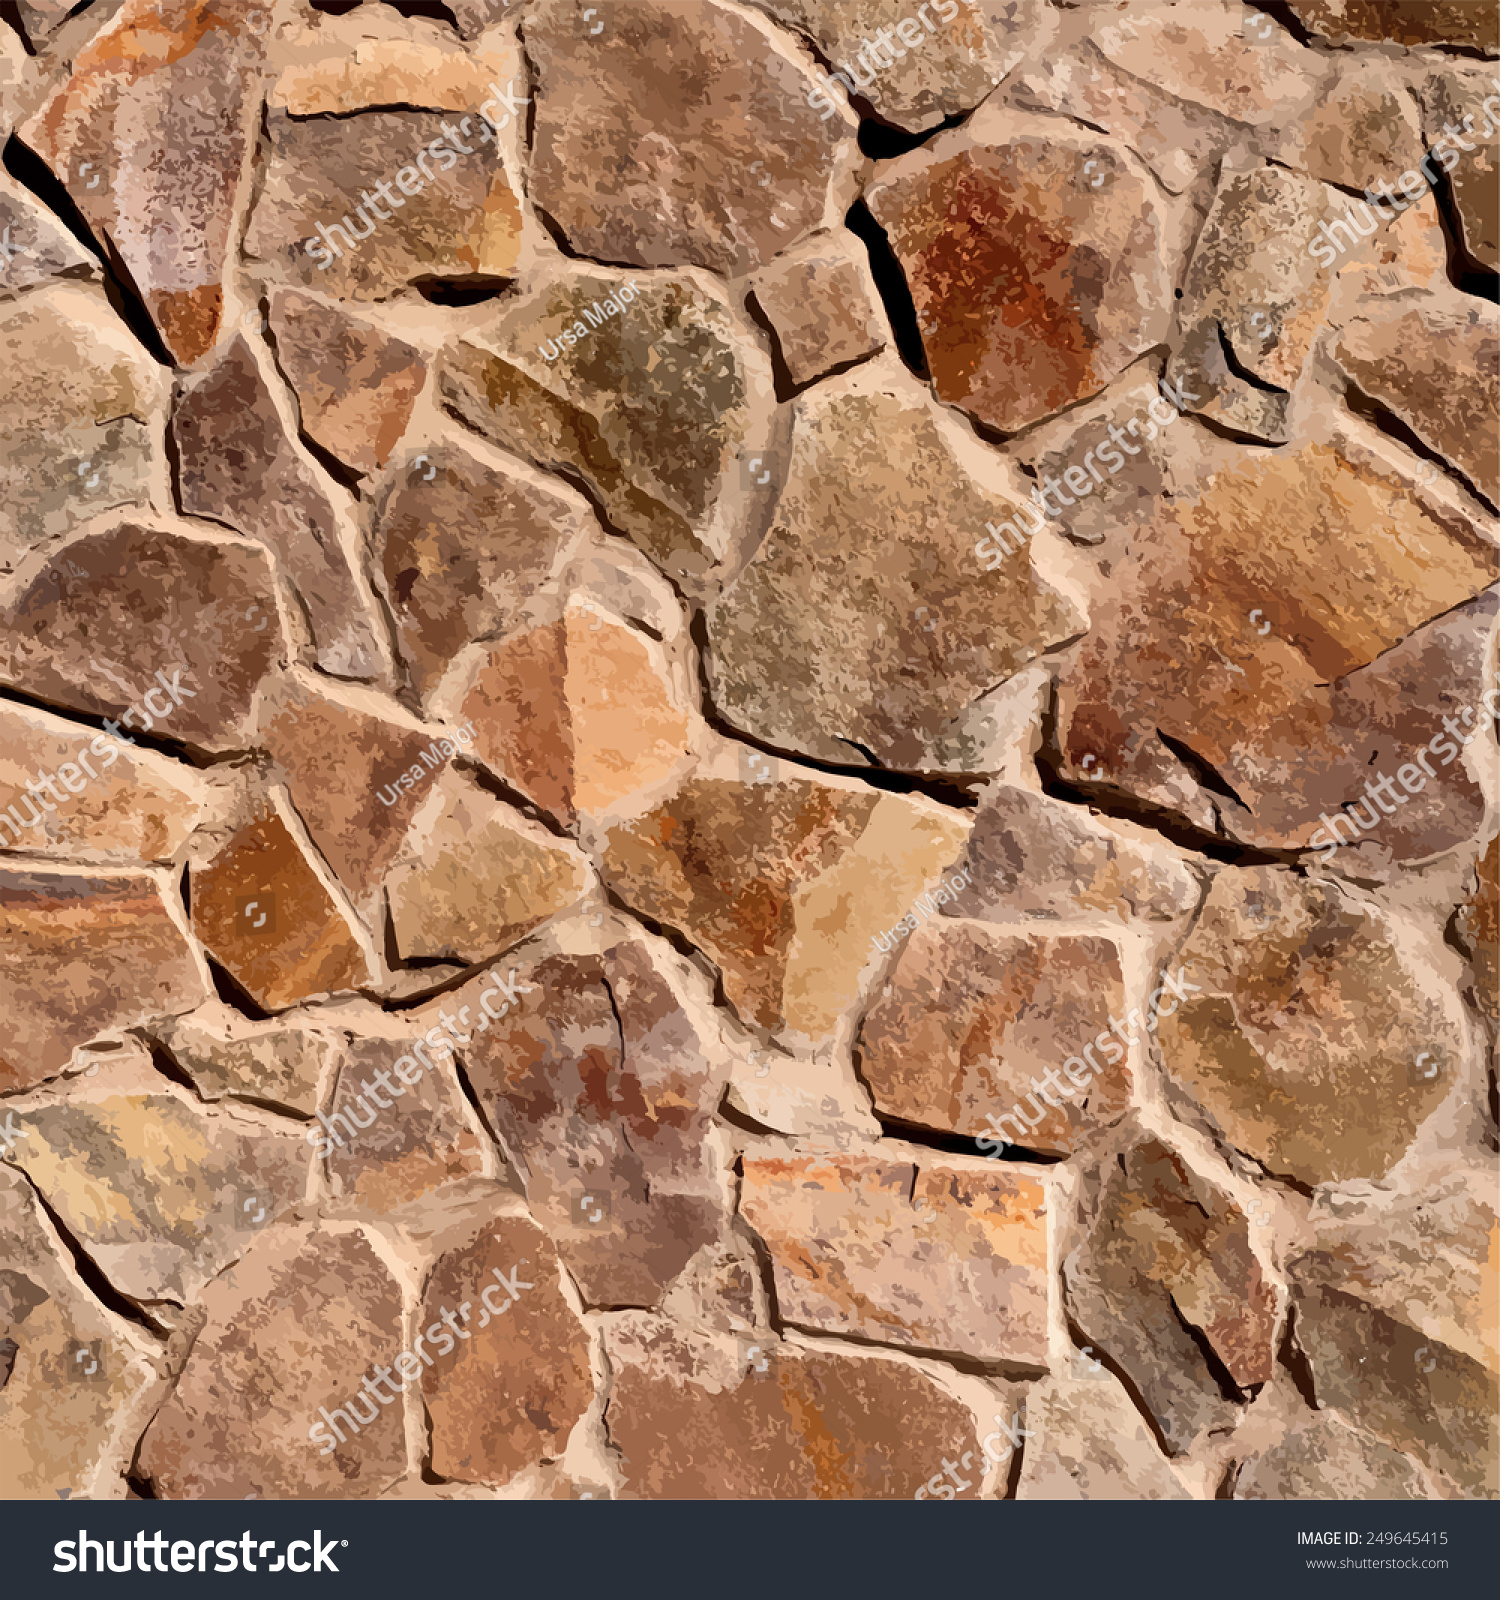 Wild Stone Wall Texture For Your Design. Stock Photo 249645415